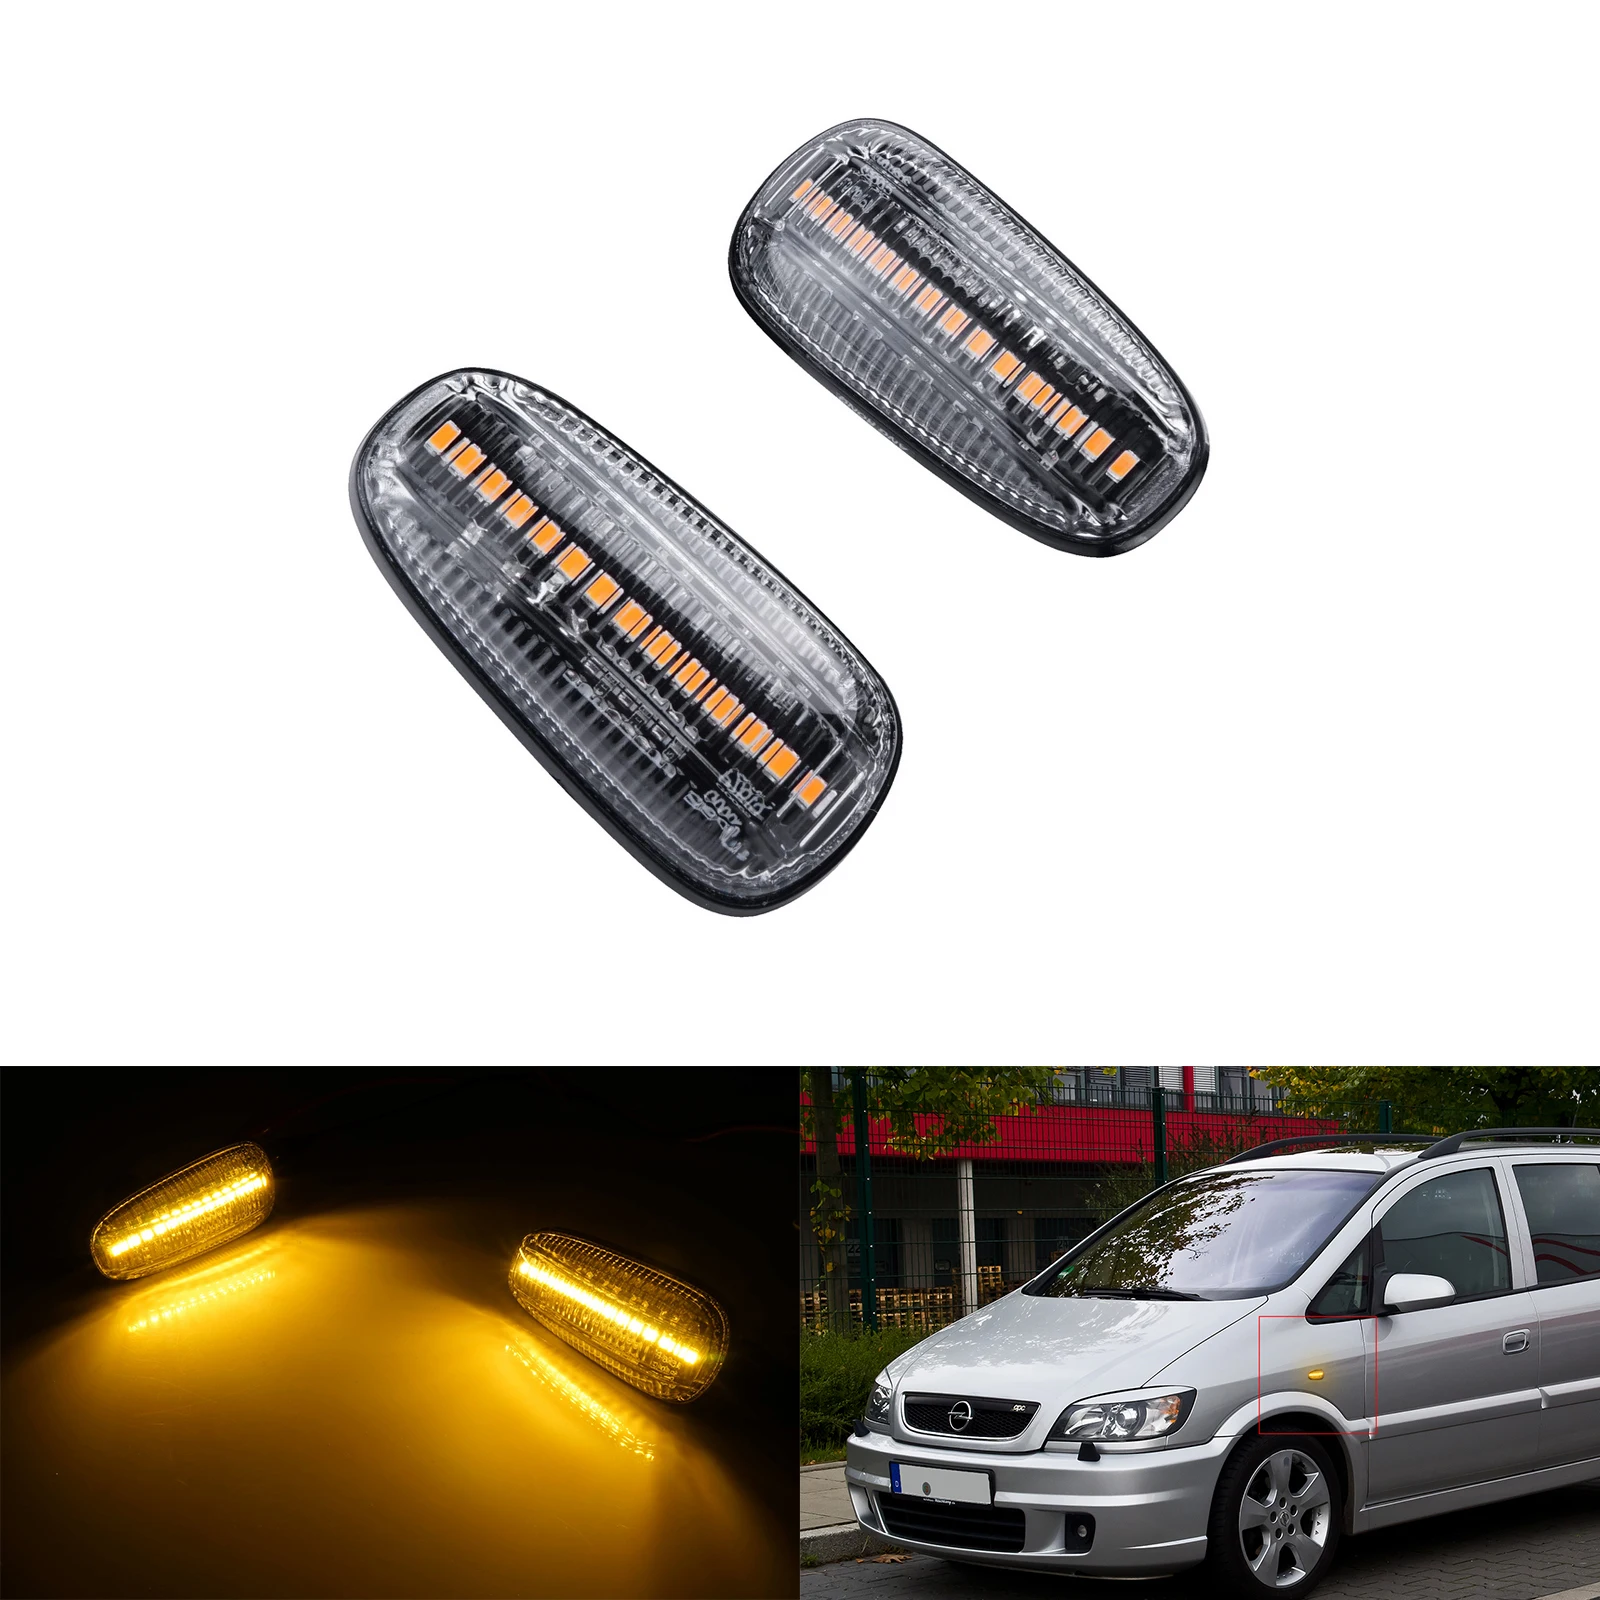 

ANGRONG 2xAmber Clear Lens LED Indicator Side Repeater Light For Opel Vauxhall Astra G IV Zafira A MK I Auto Lamp